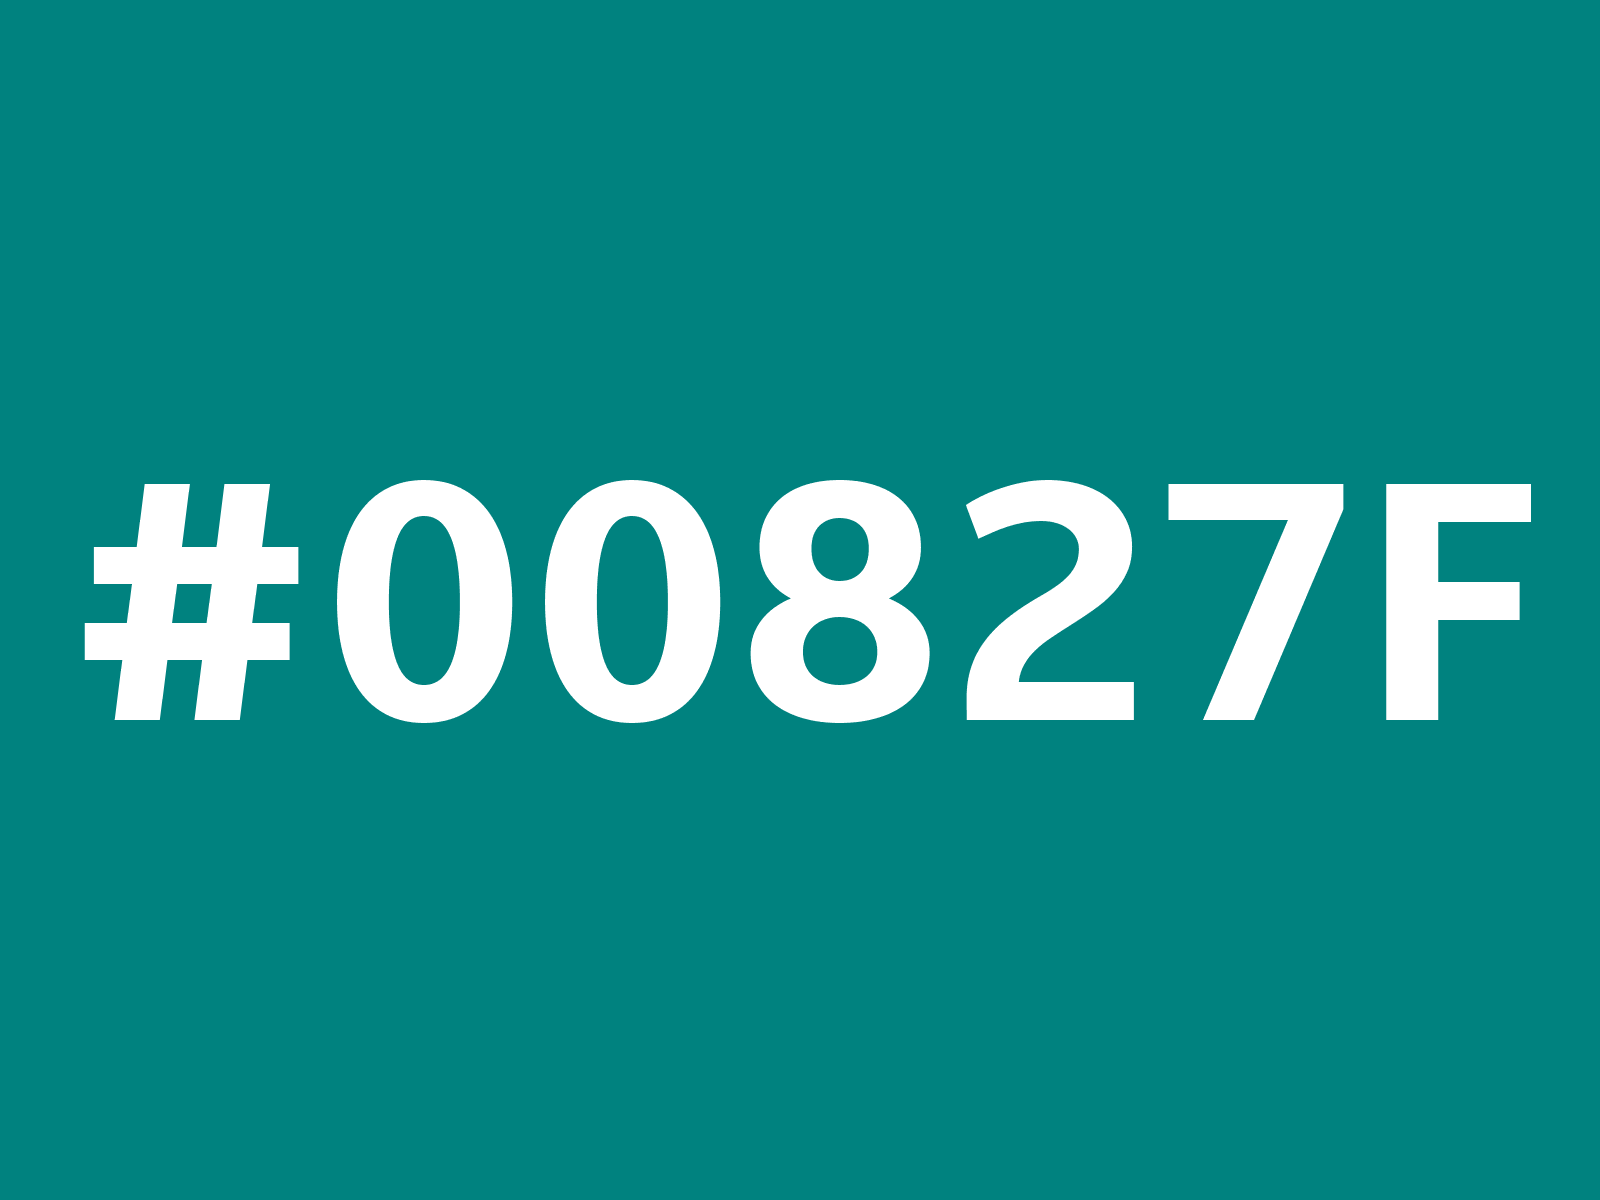 Teal green color (Hex 00827F)